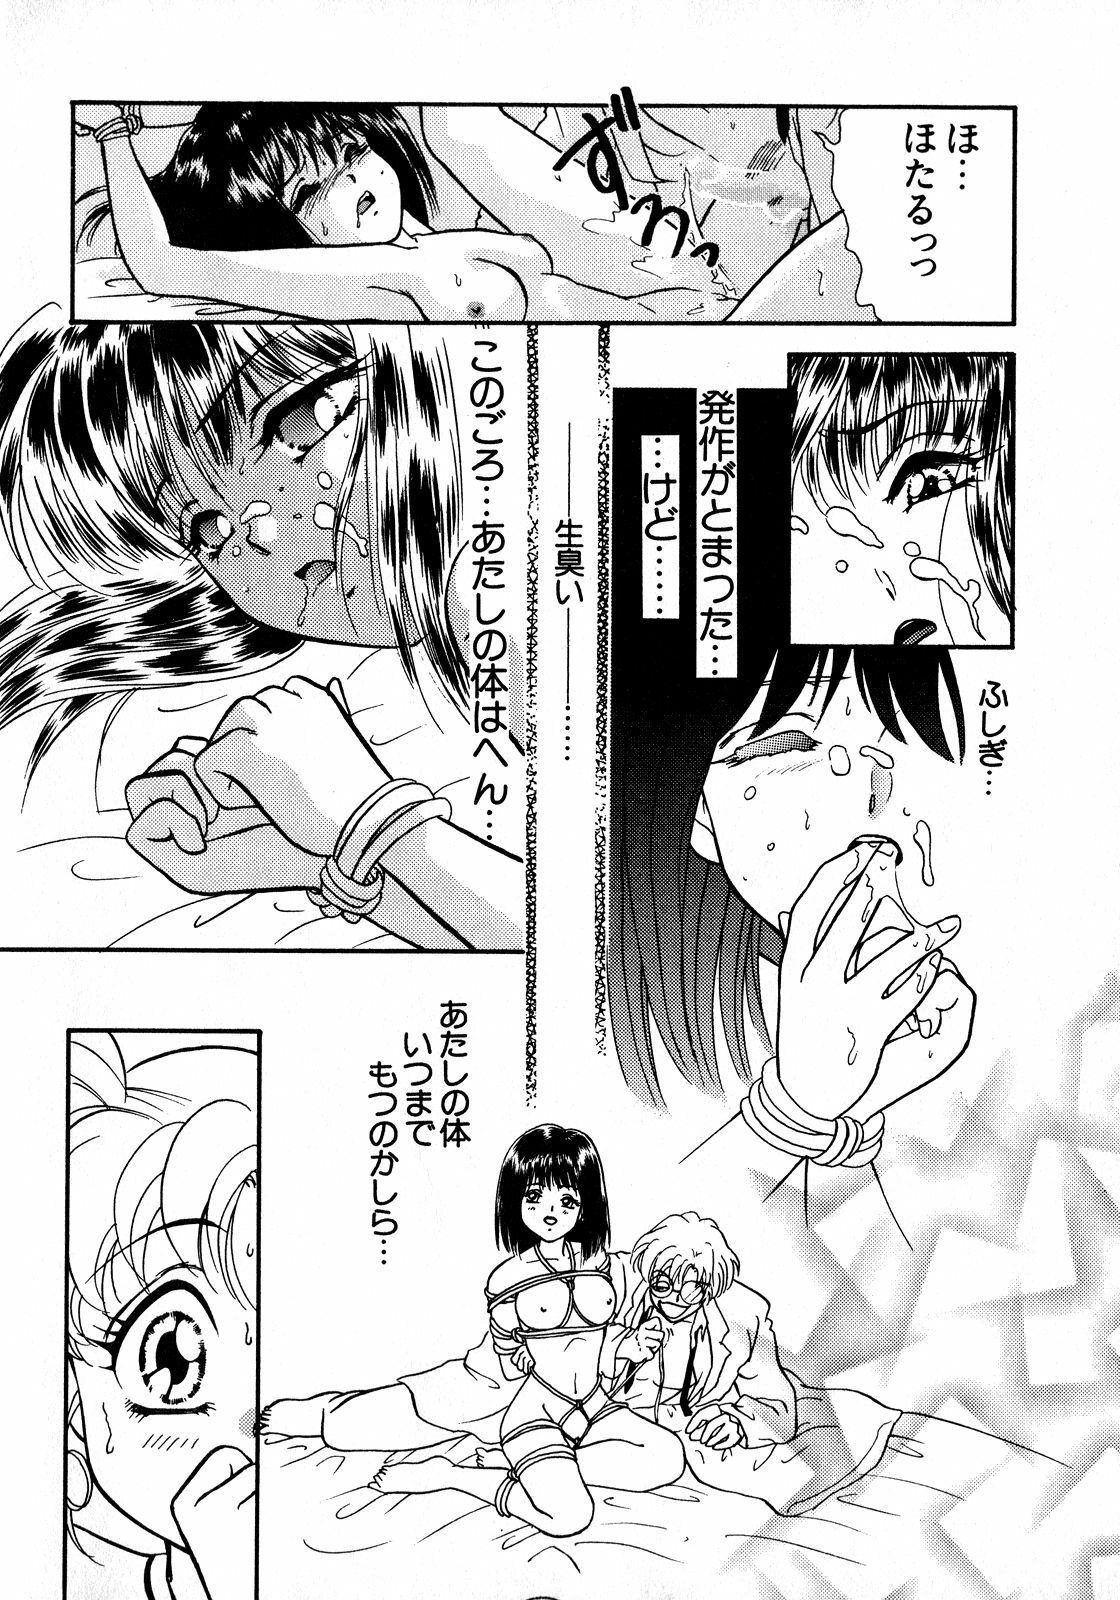 [Anthology] Lunatic Party 8 (Sailor Moon) page 29 full